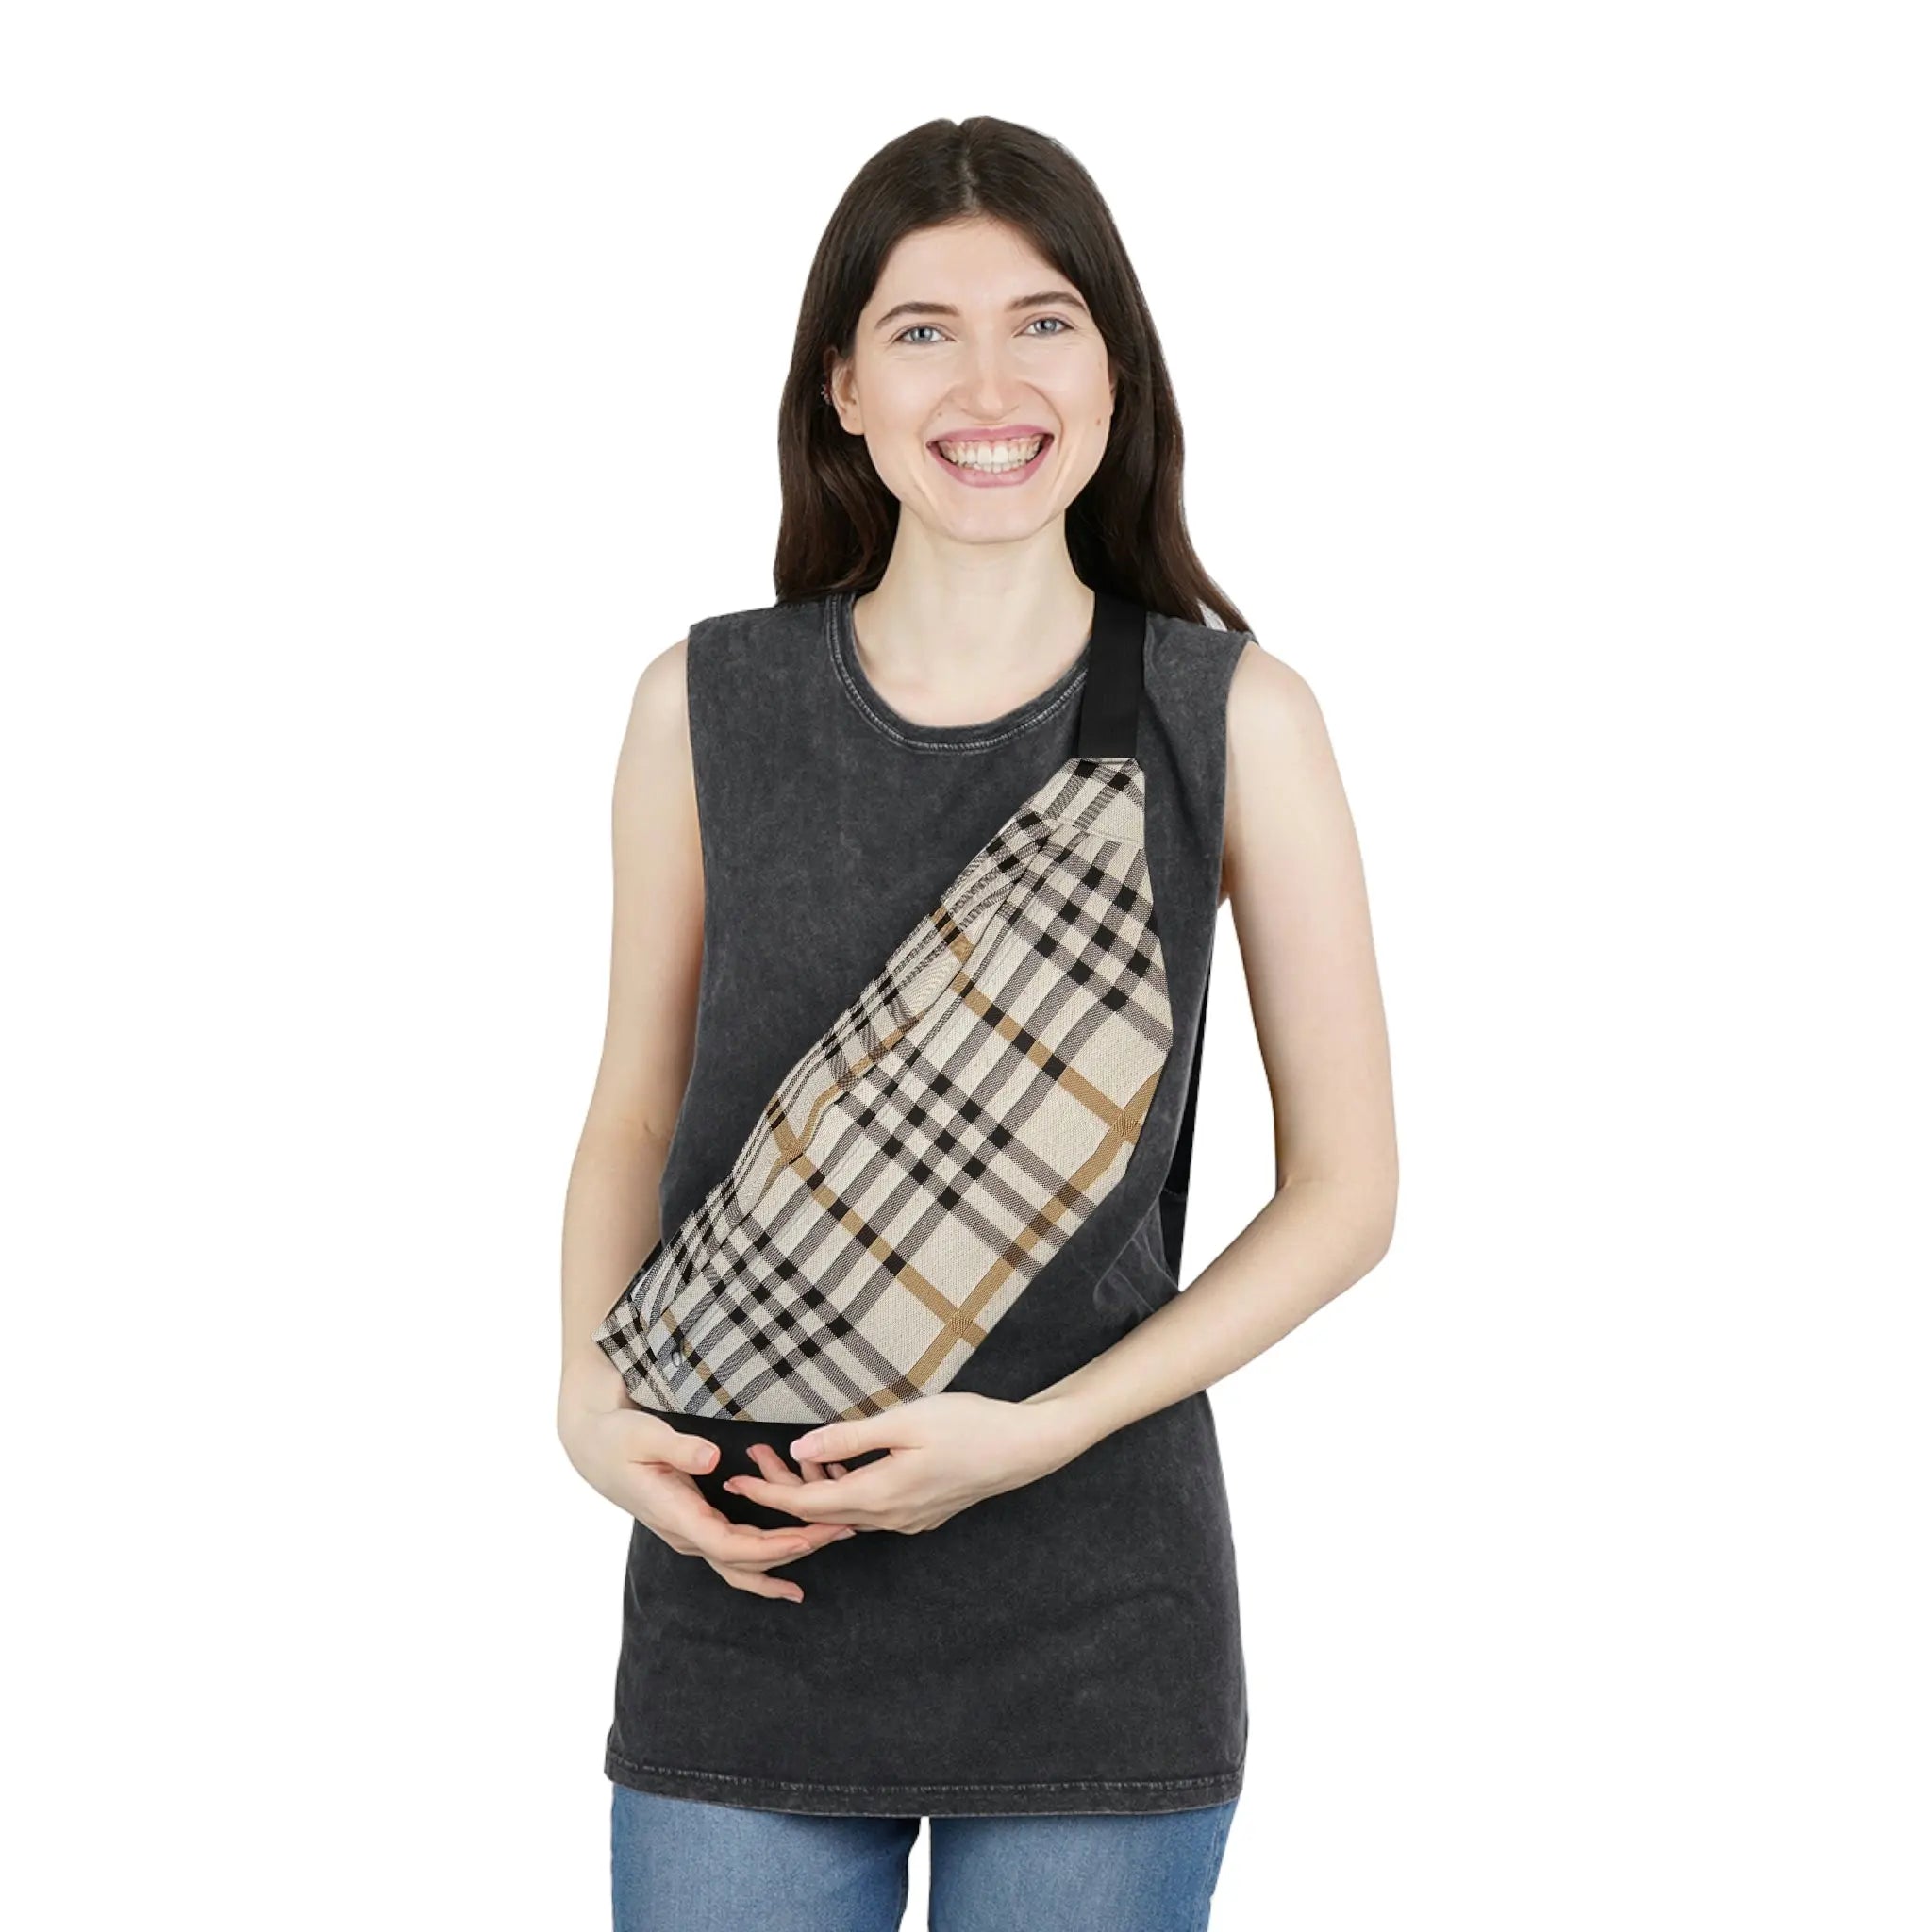  Designer Collection in Plaid (Beige) Large Fanny Pack Bags